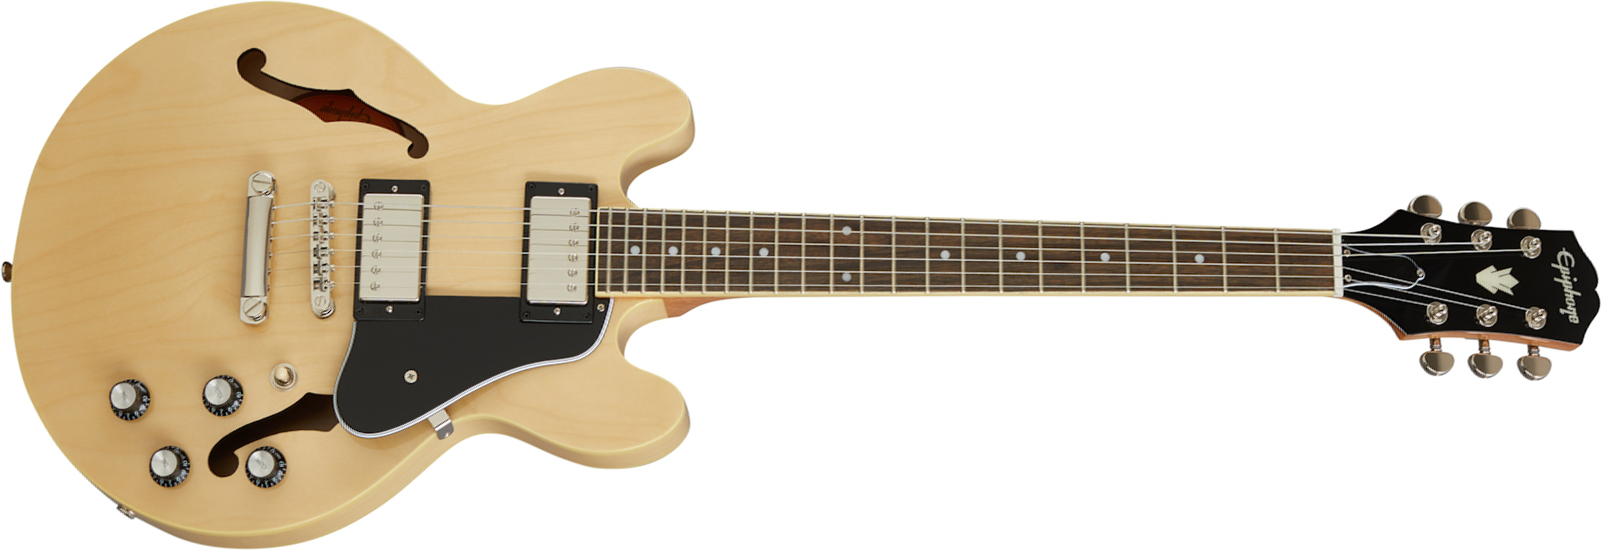 Epiphone Es-339 Inspired By Gibson 2020 2h Ht Rw - Natural - Semi-hollow electric guitar - Main picture